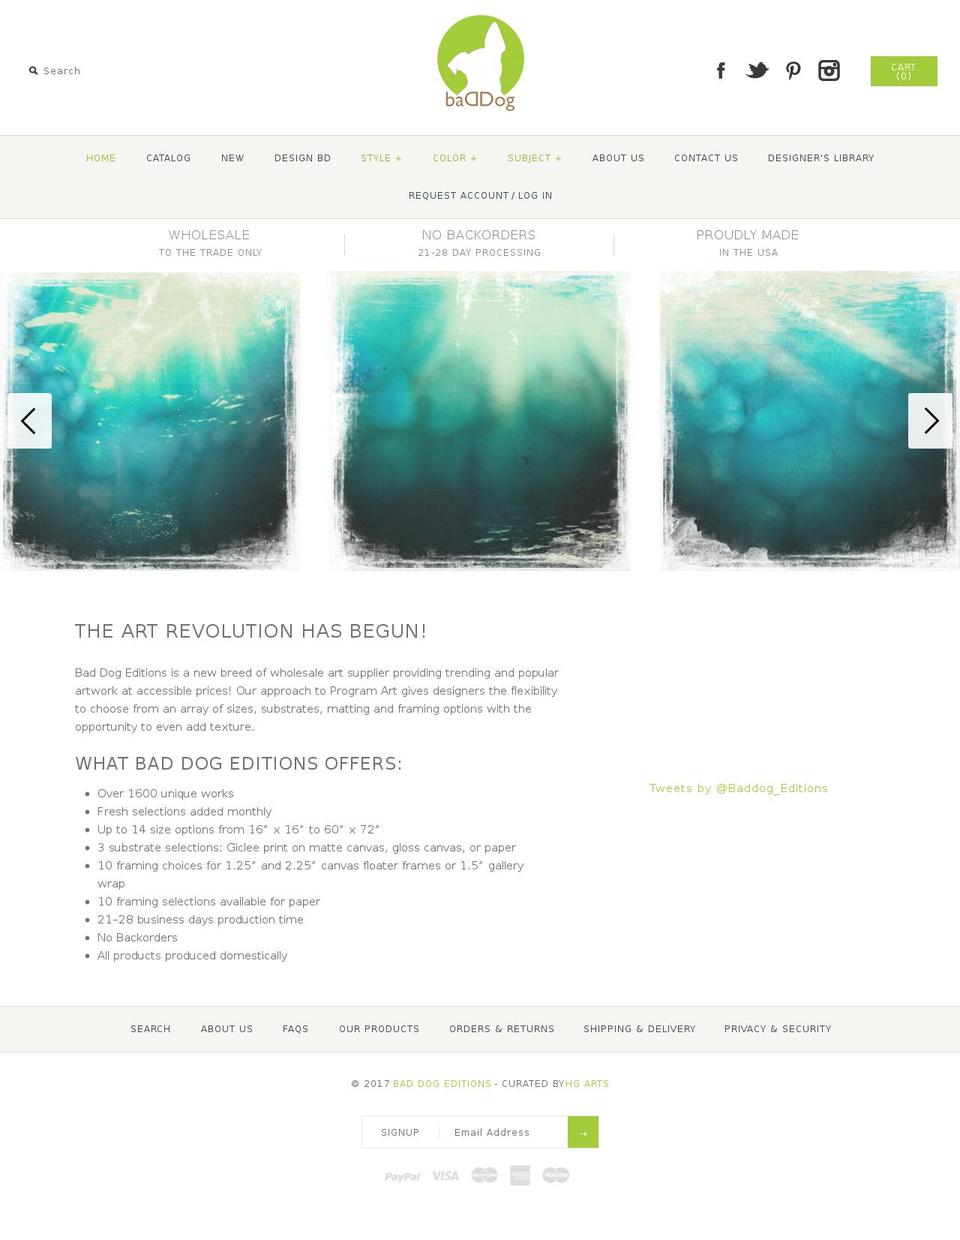 Editions Shopify theme site example baddogeditions.com